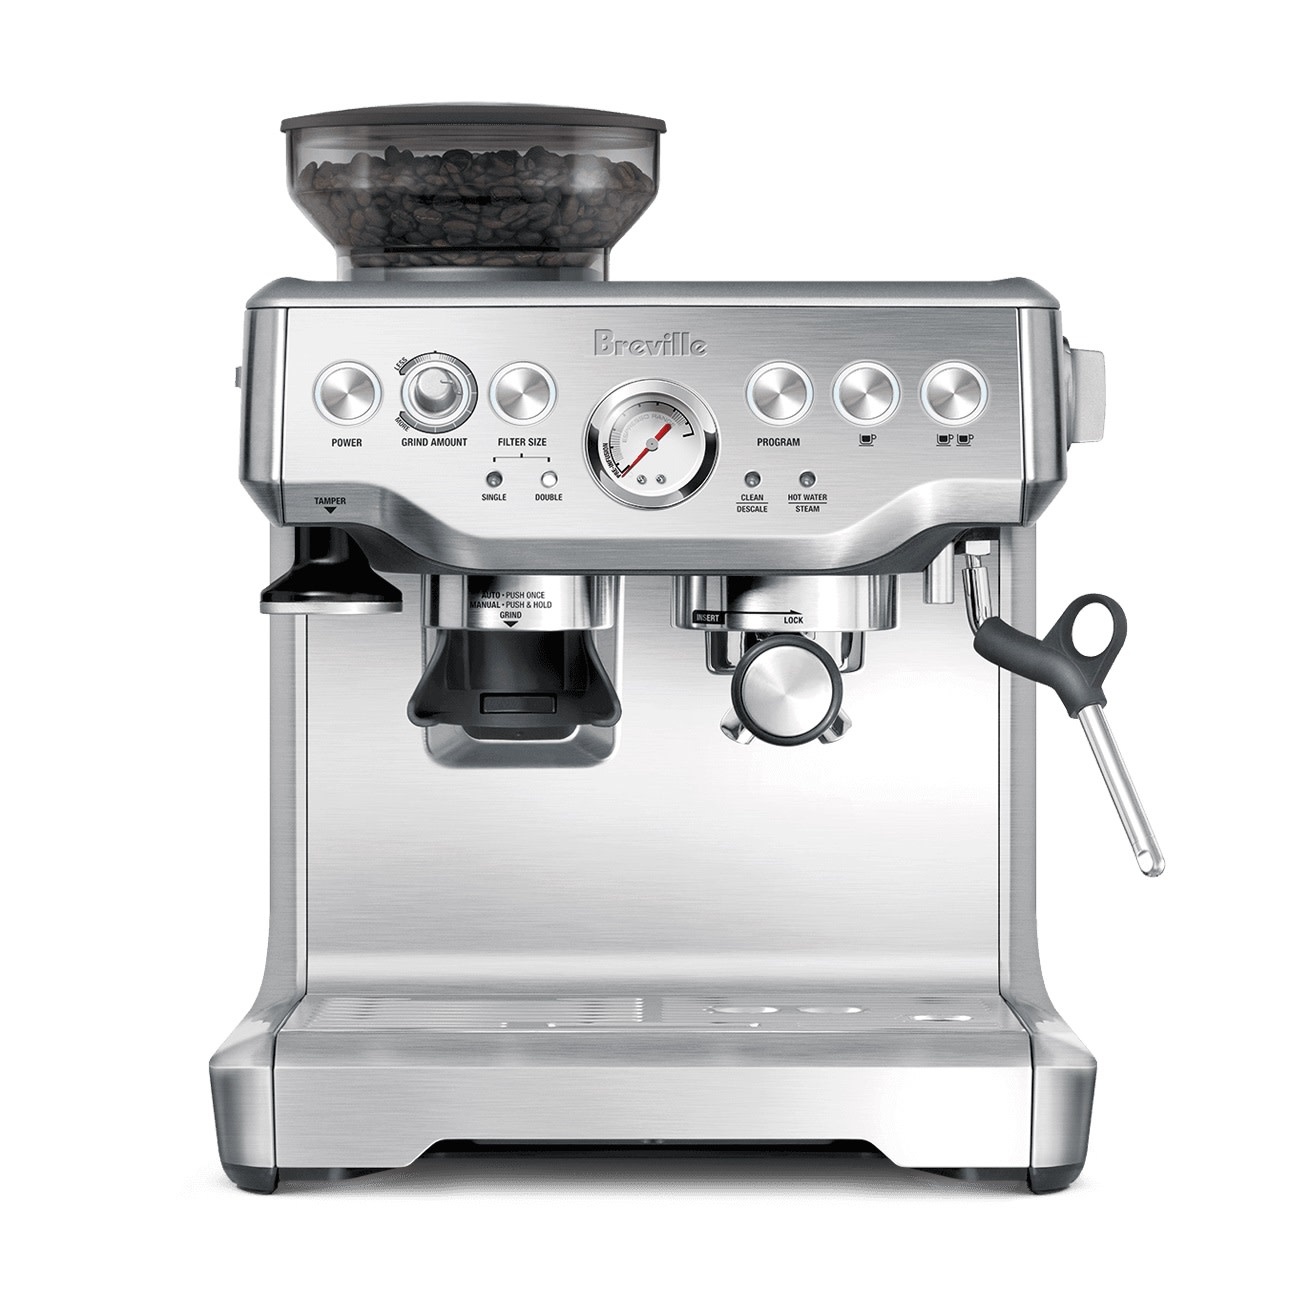 Breville BDC650BSS Grind Control Coffee Maker, Brushed Stainless Steel -  Coffee Makers & Espresso Machines, Facebook Marketplace